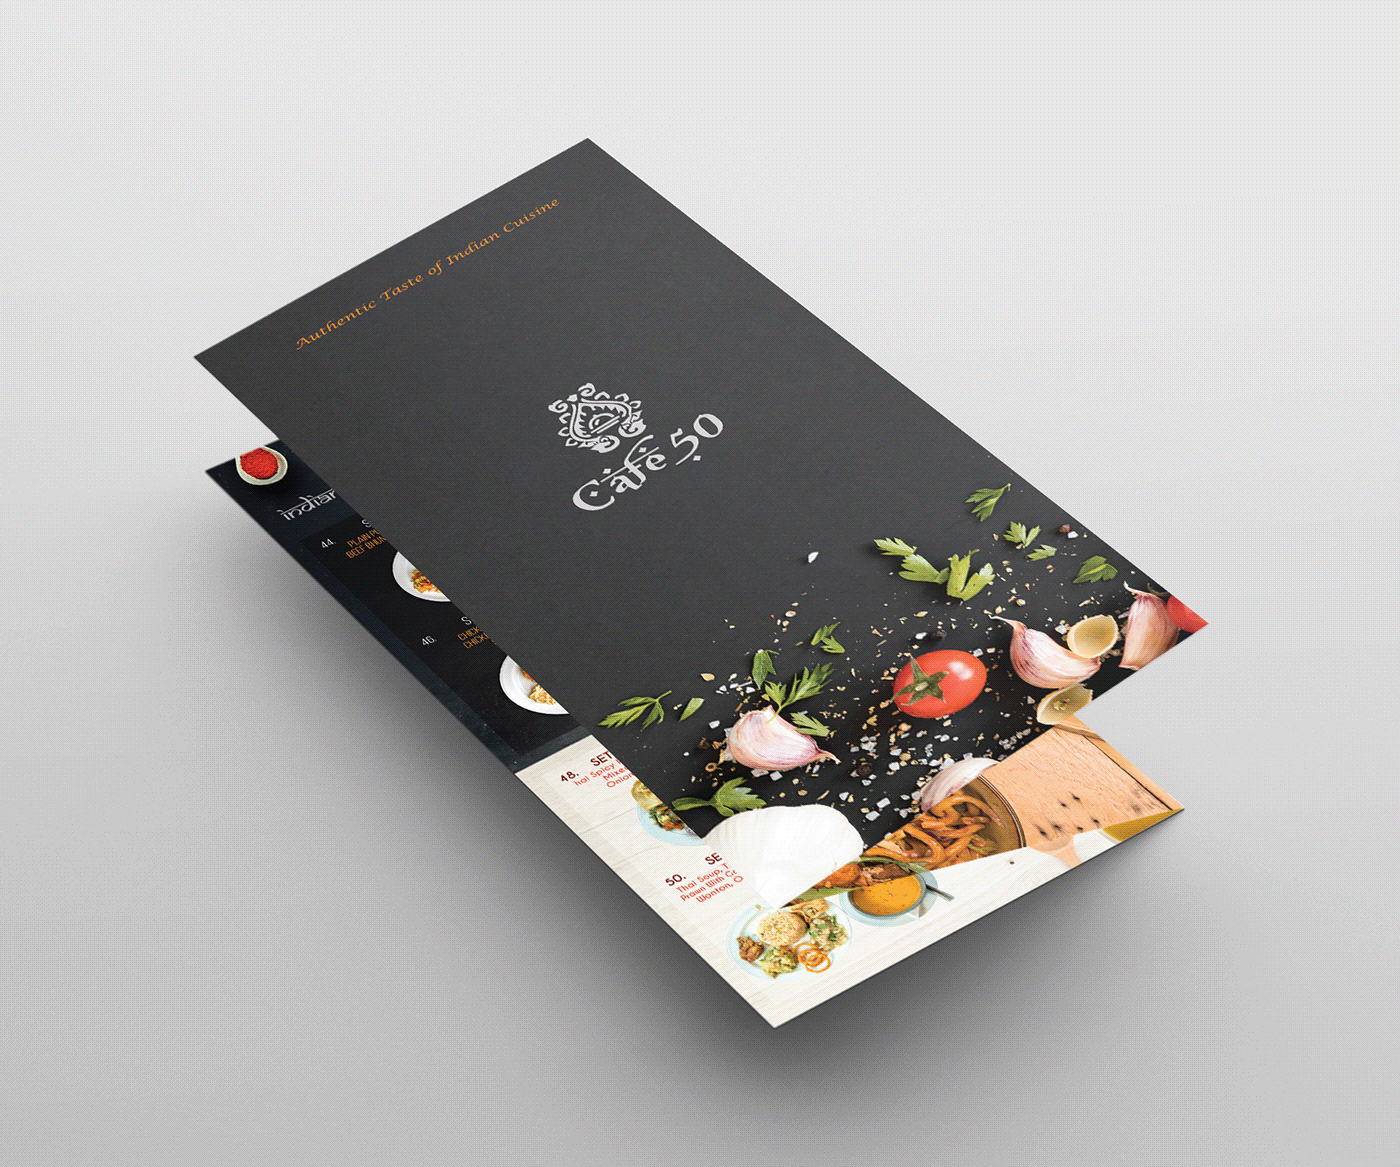 This is the food menu I've designed for Cafe50 Restaurant in Dhanmondi Dhaka. 